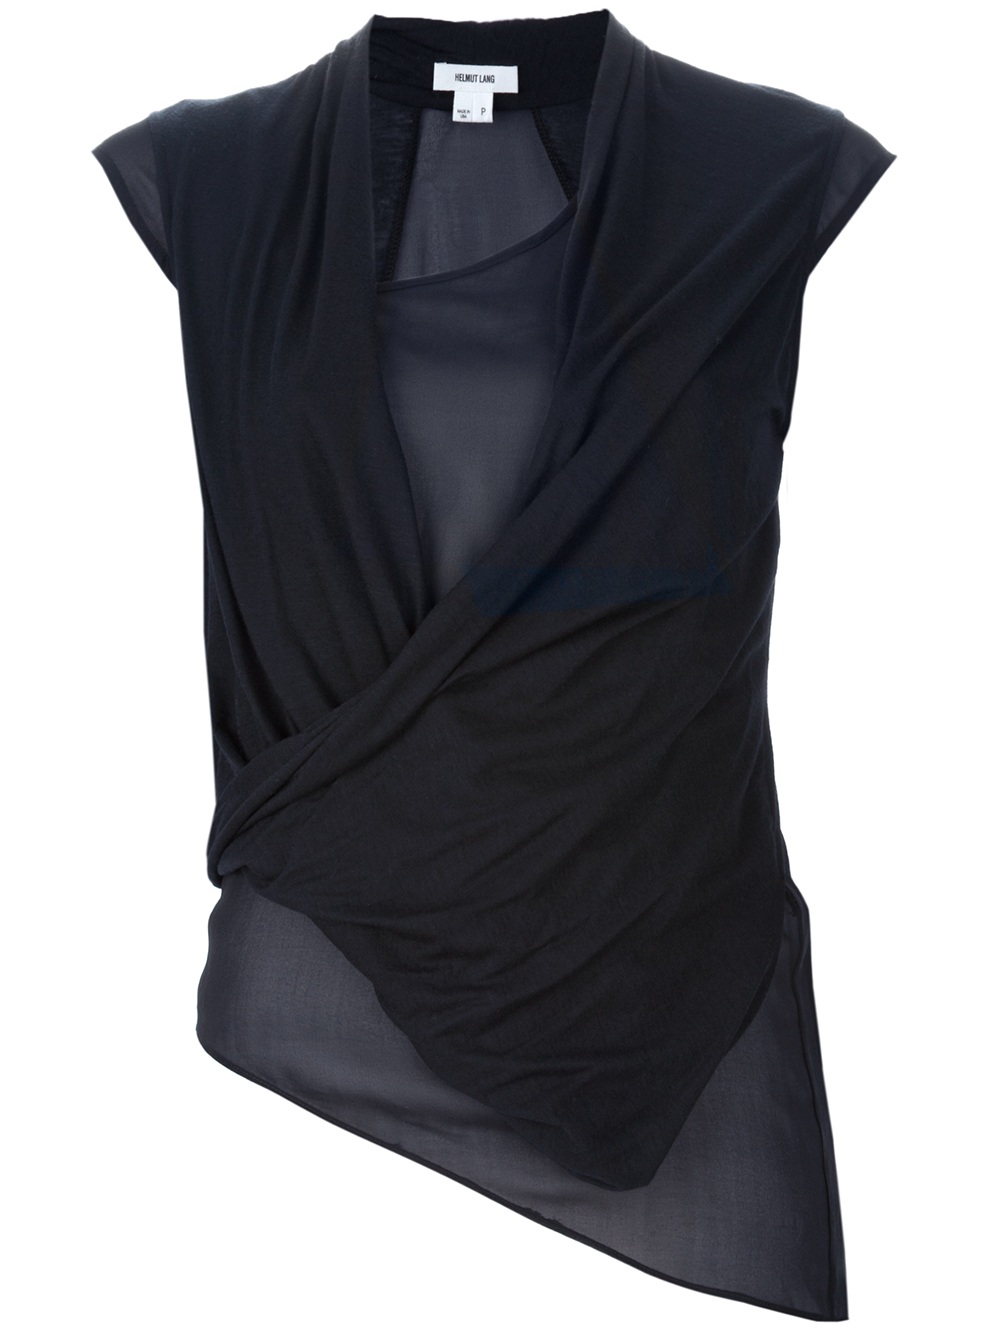 Helmut Lang Draped Wrap Around Top in Black - Lyst